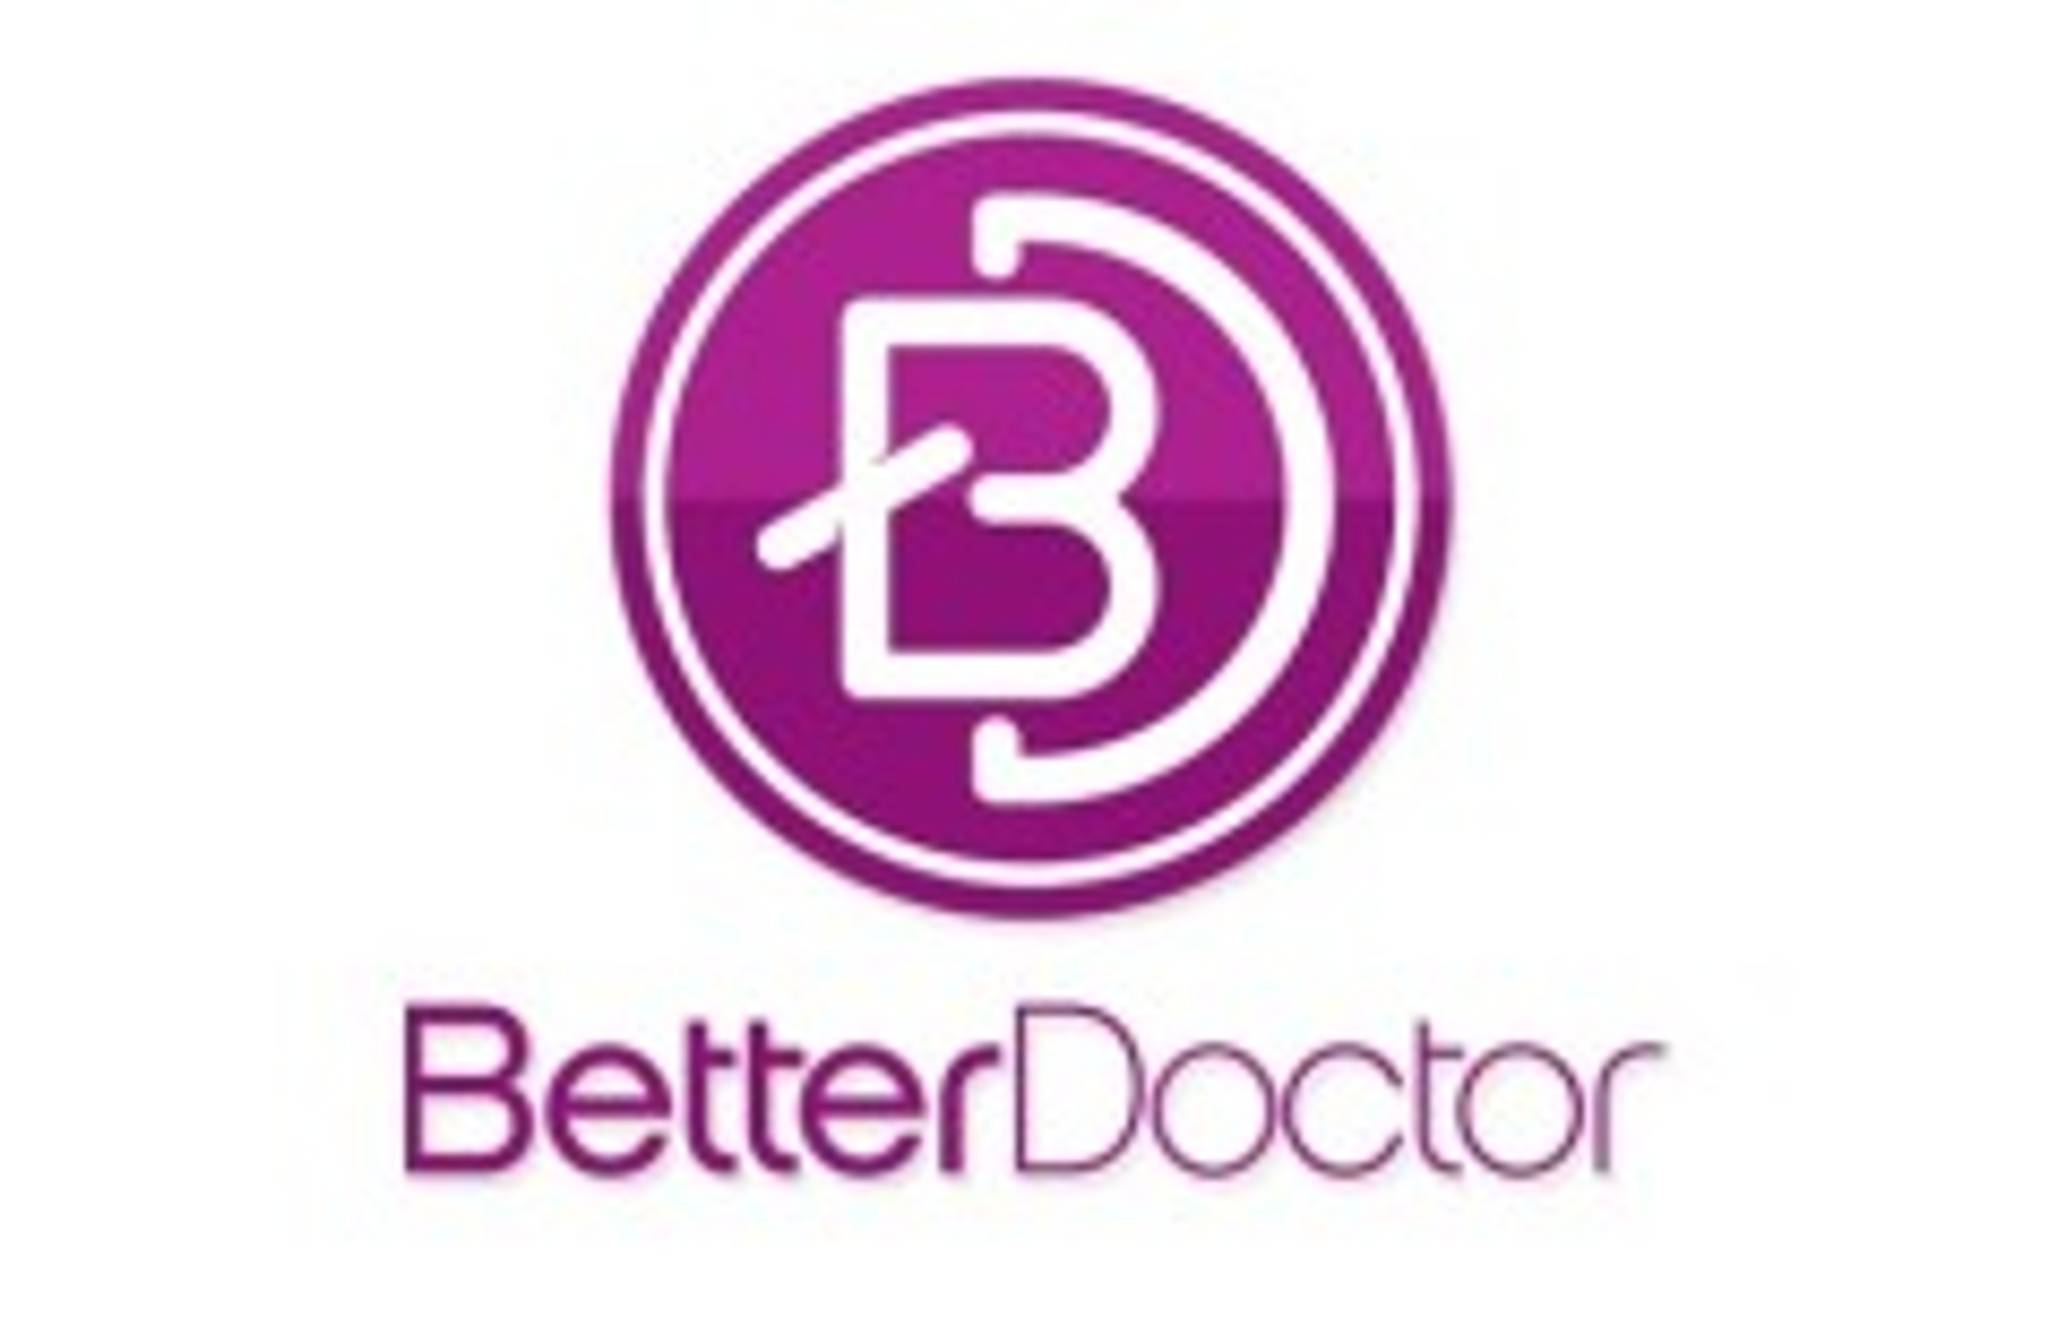 Helping people find a better doctor